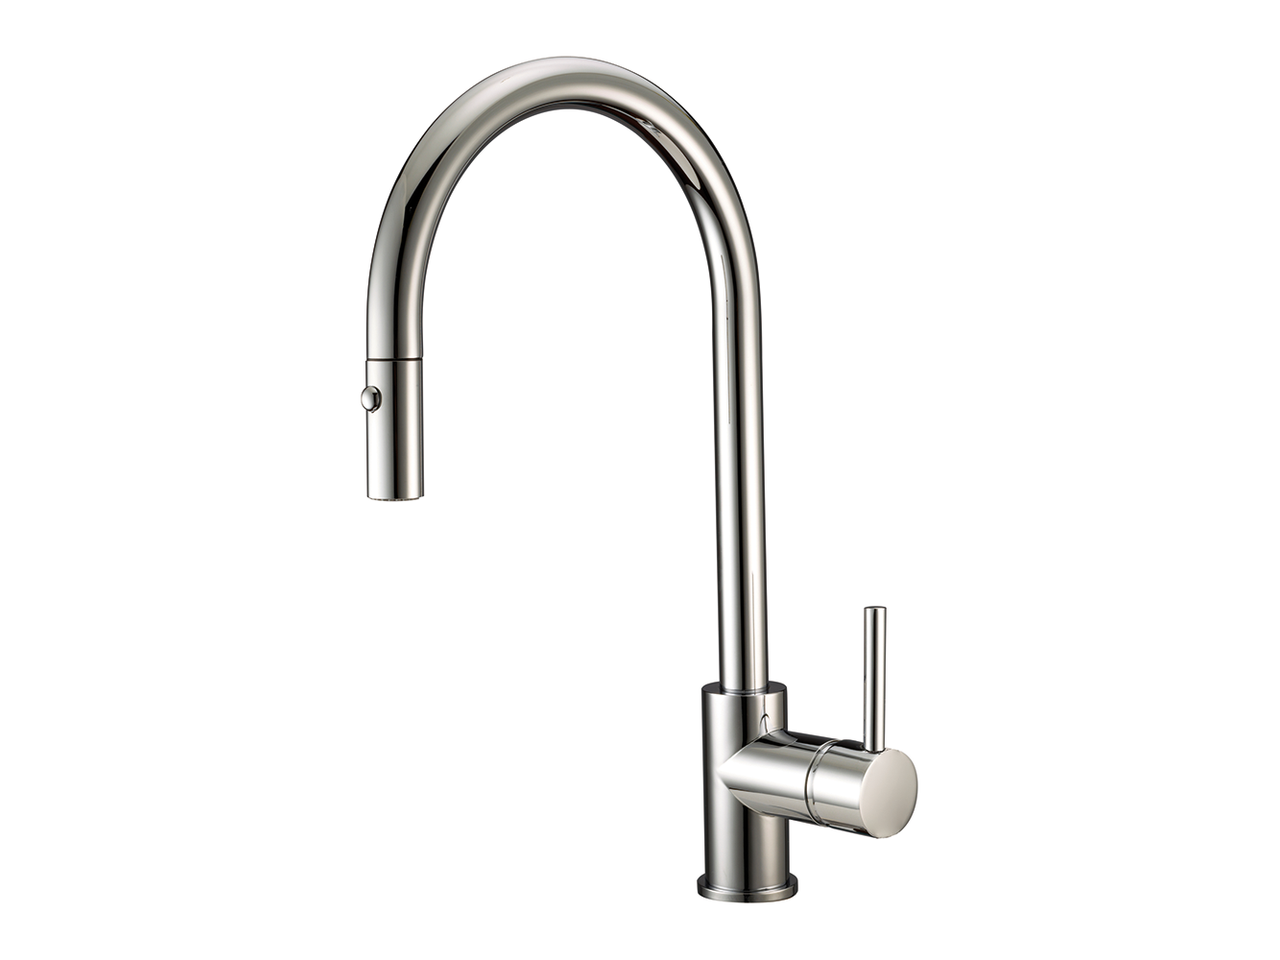 CisalSingle lever sink mixer ES with pull out handspray KITCHEN_CV000575